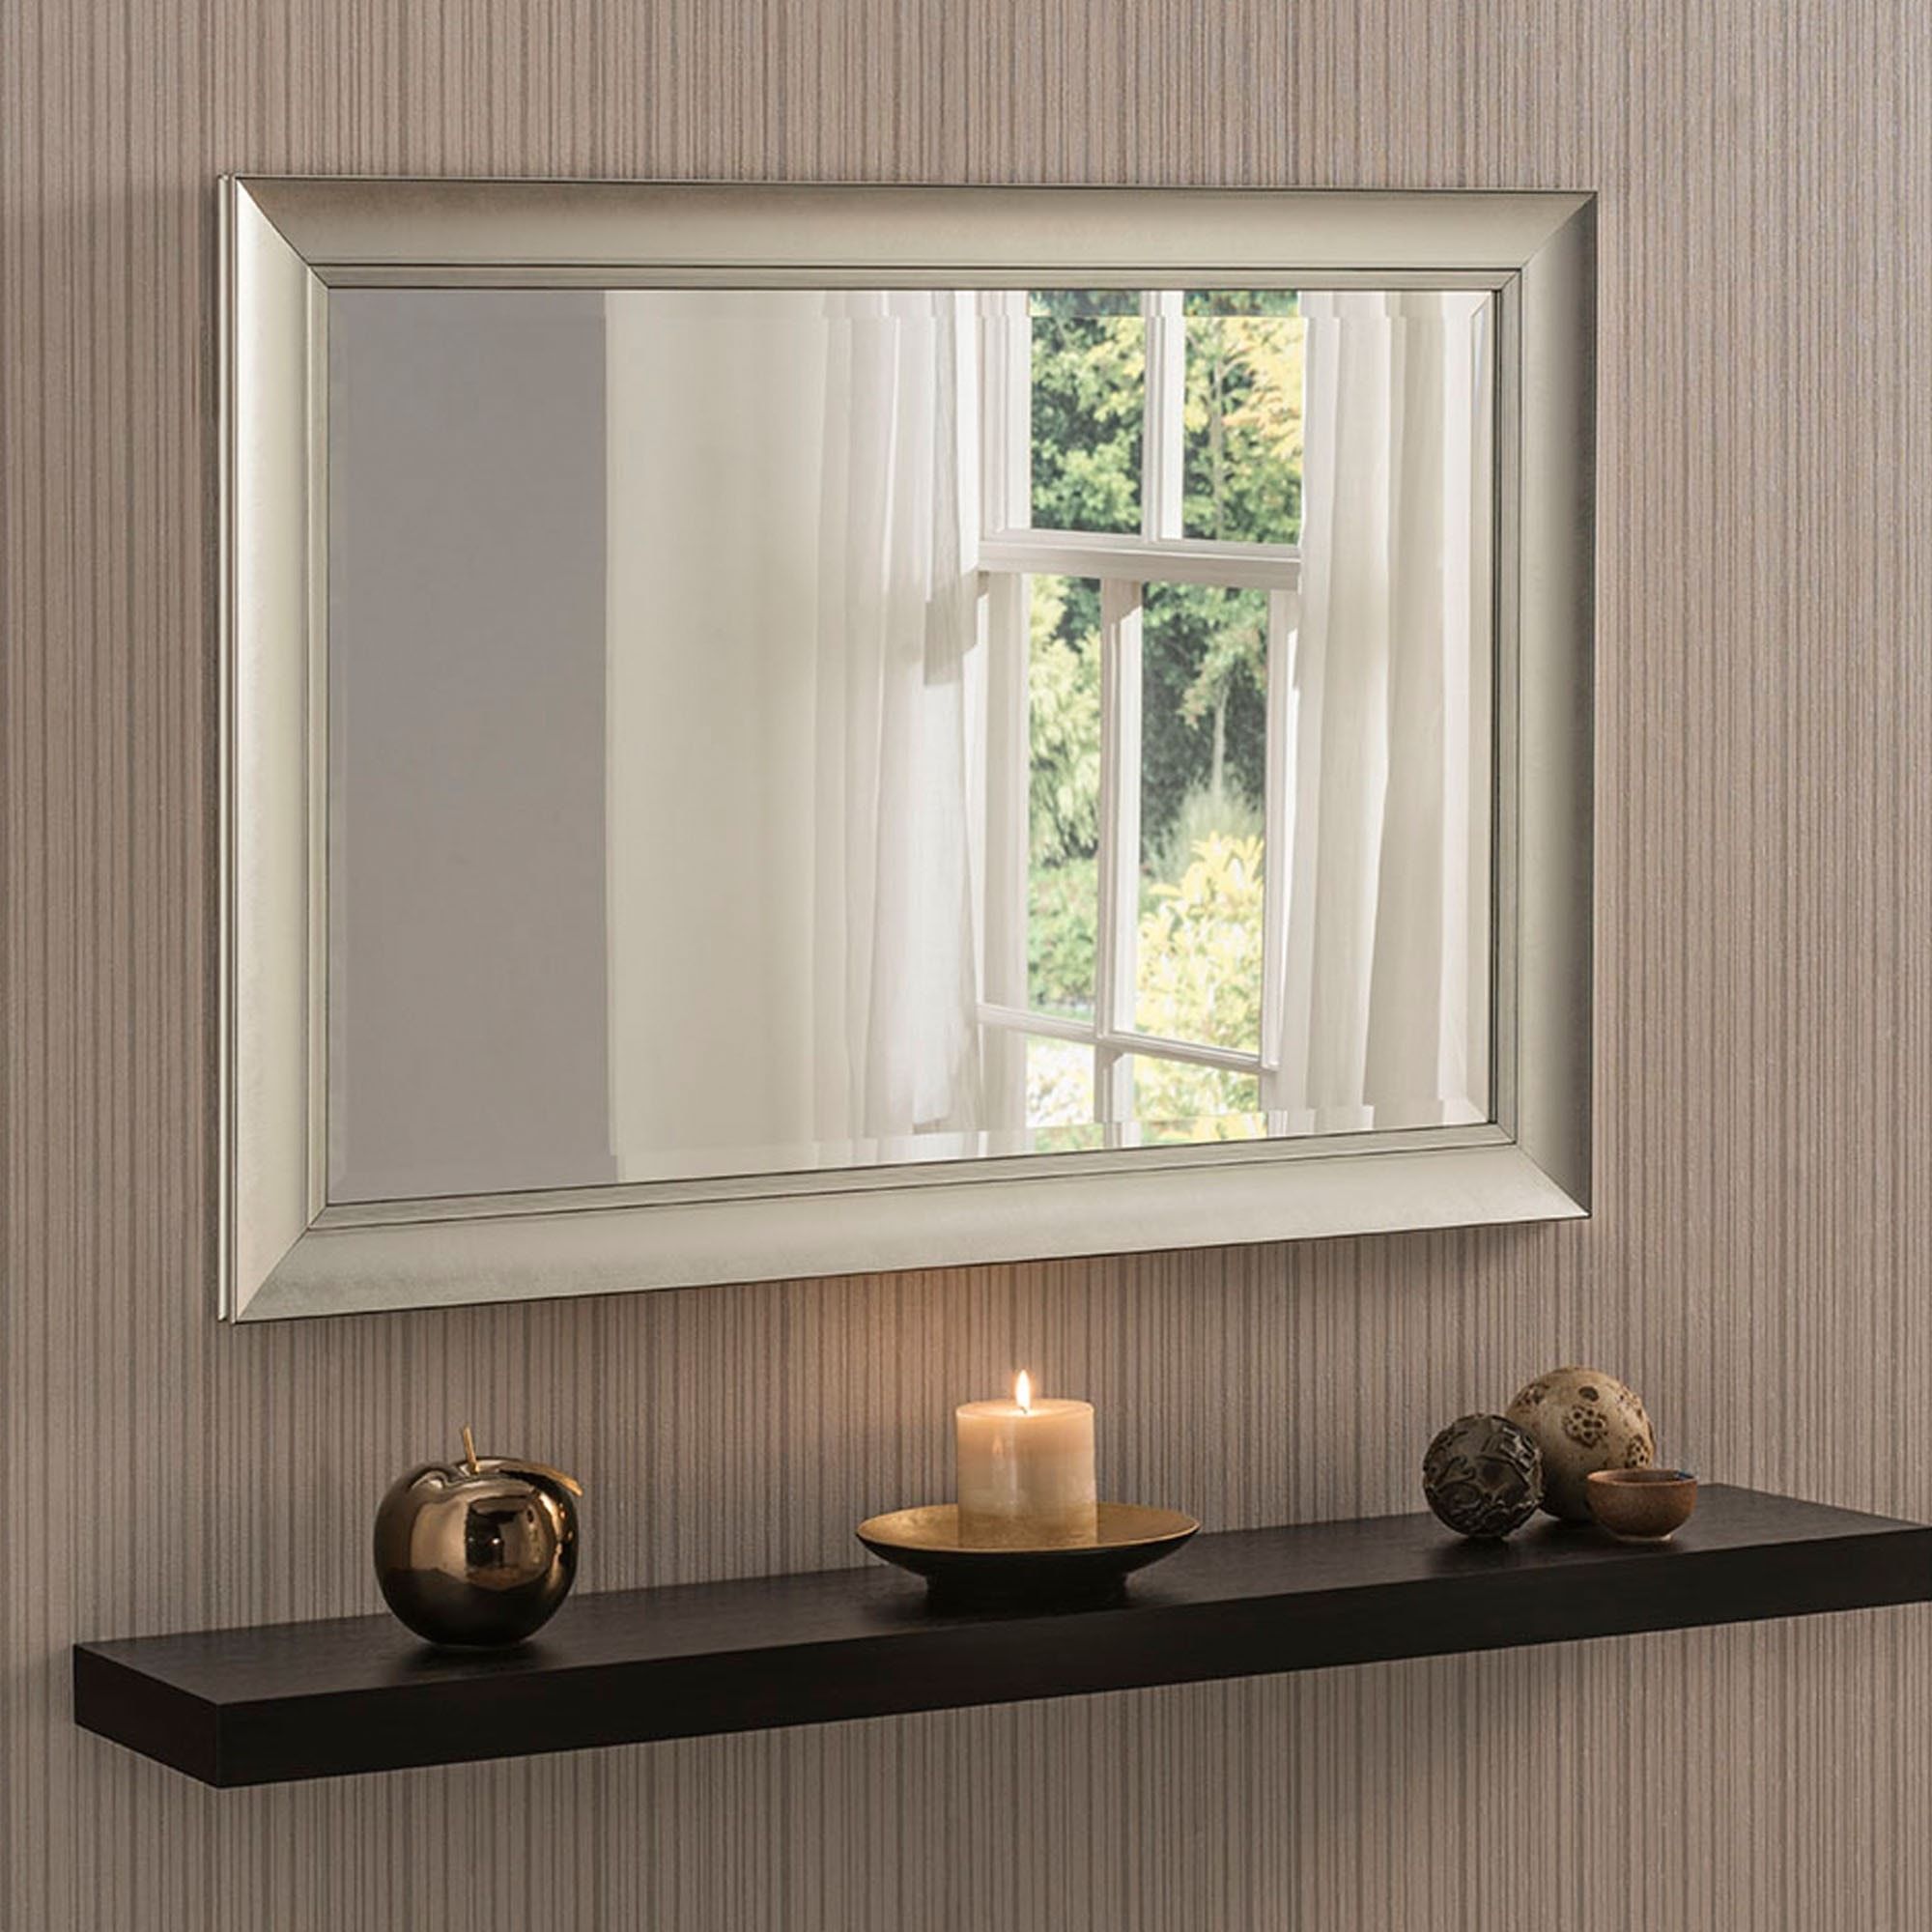 Contemporary Silver Beveled Wall Mirror | Wall Mirrors With Regard To Silver Metal Cut Edge Wall Mirrors (View 15 of 15)